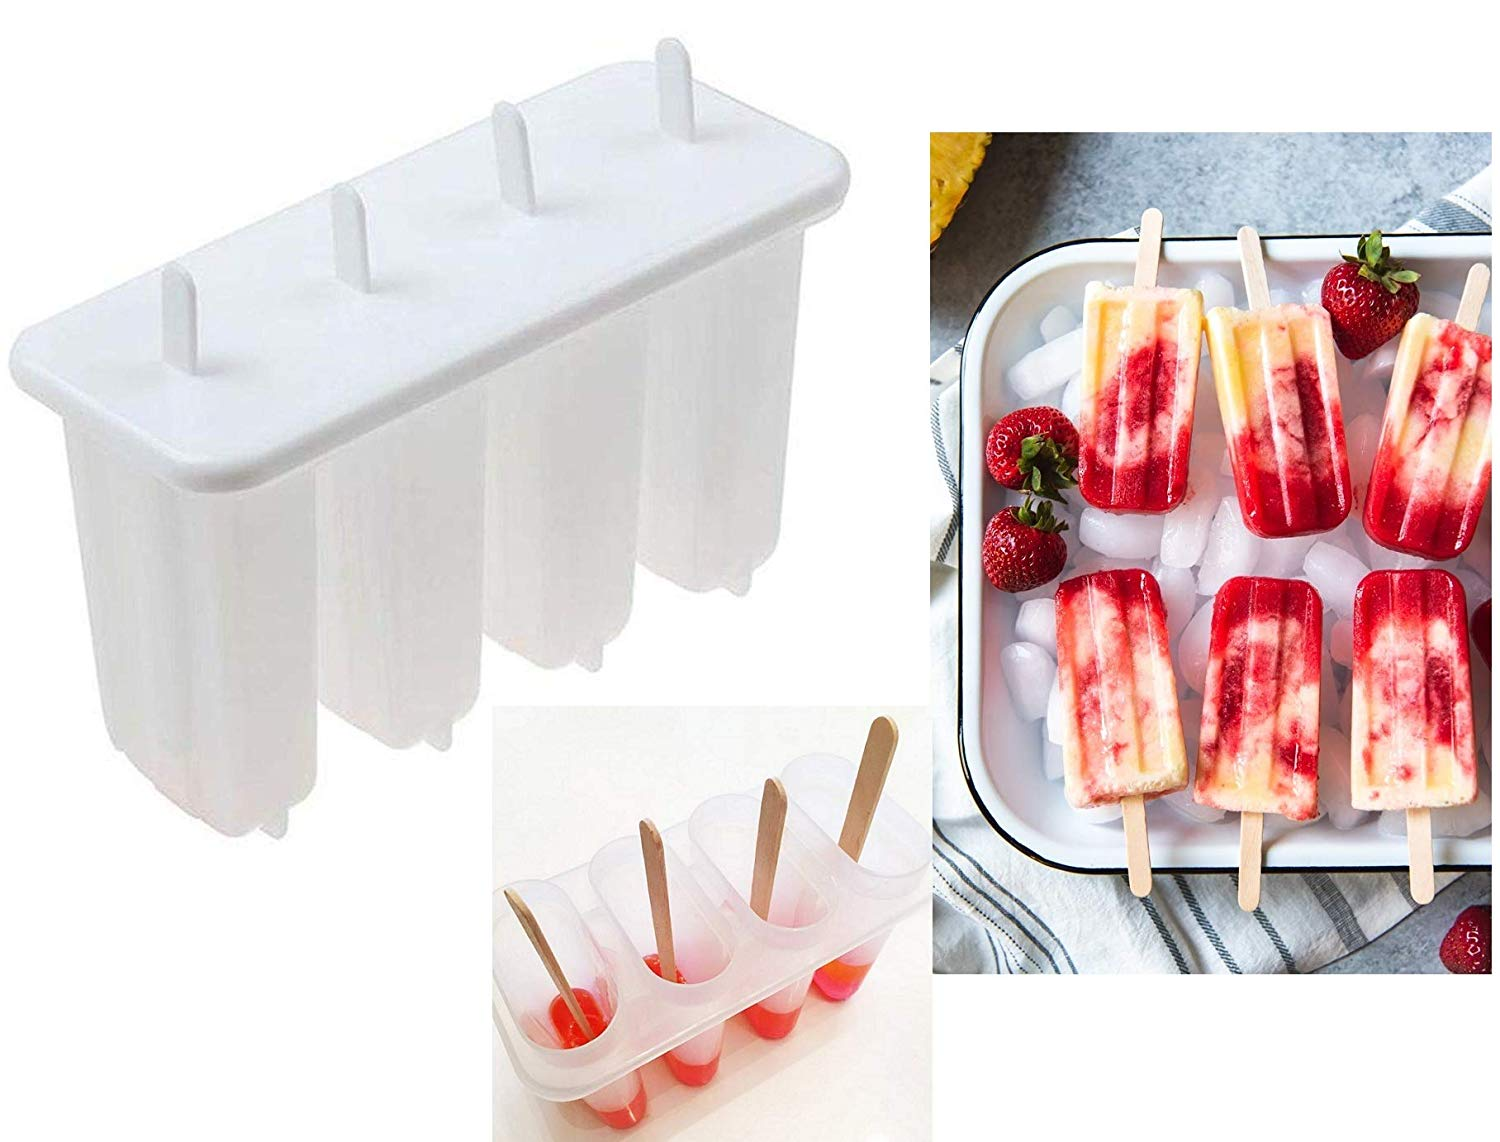 Hukimoyo Reusable Plastic DIY Food Grade Silicone Flexible, Easily-Removable, BPA-free , Dishwasher Safe Frozen Ice cream Mould Lolly Pop Candy Popsicle Set with Stick, White -Set of 4 by METRENO